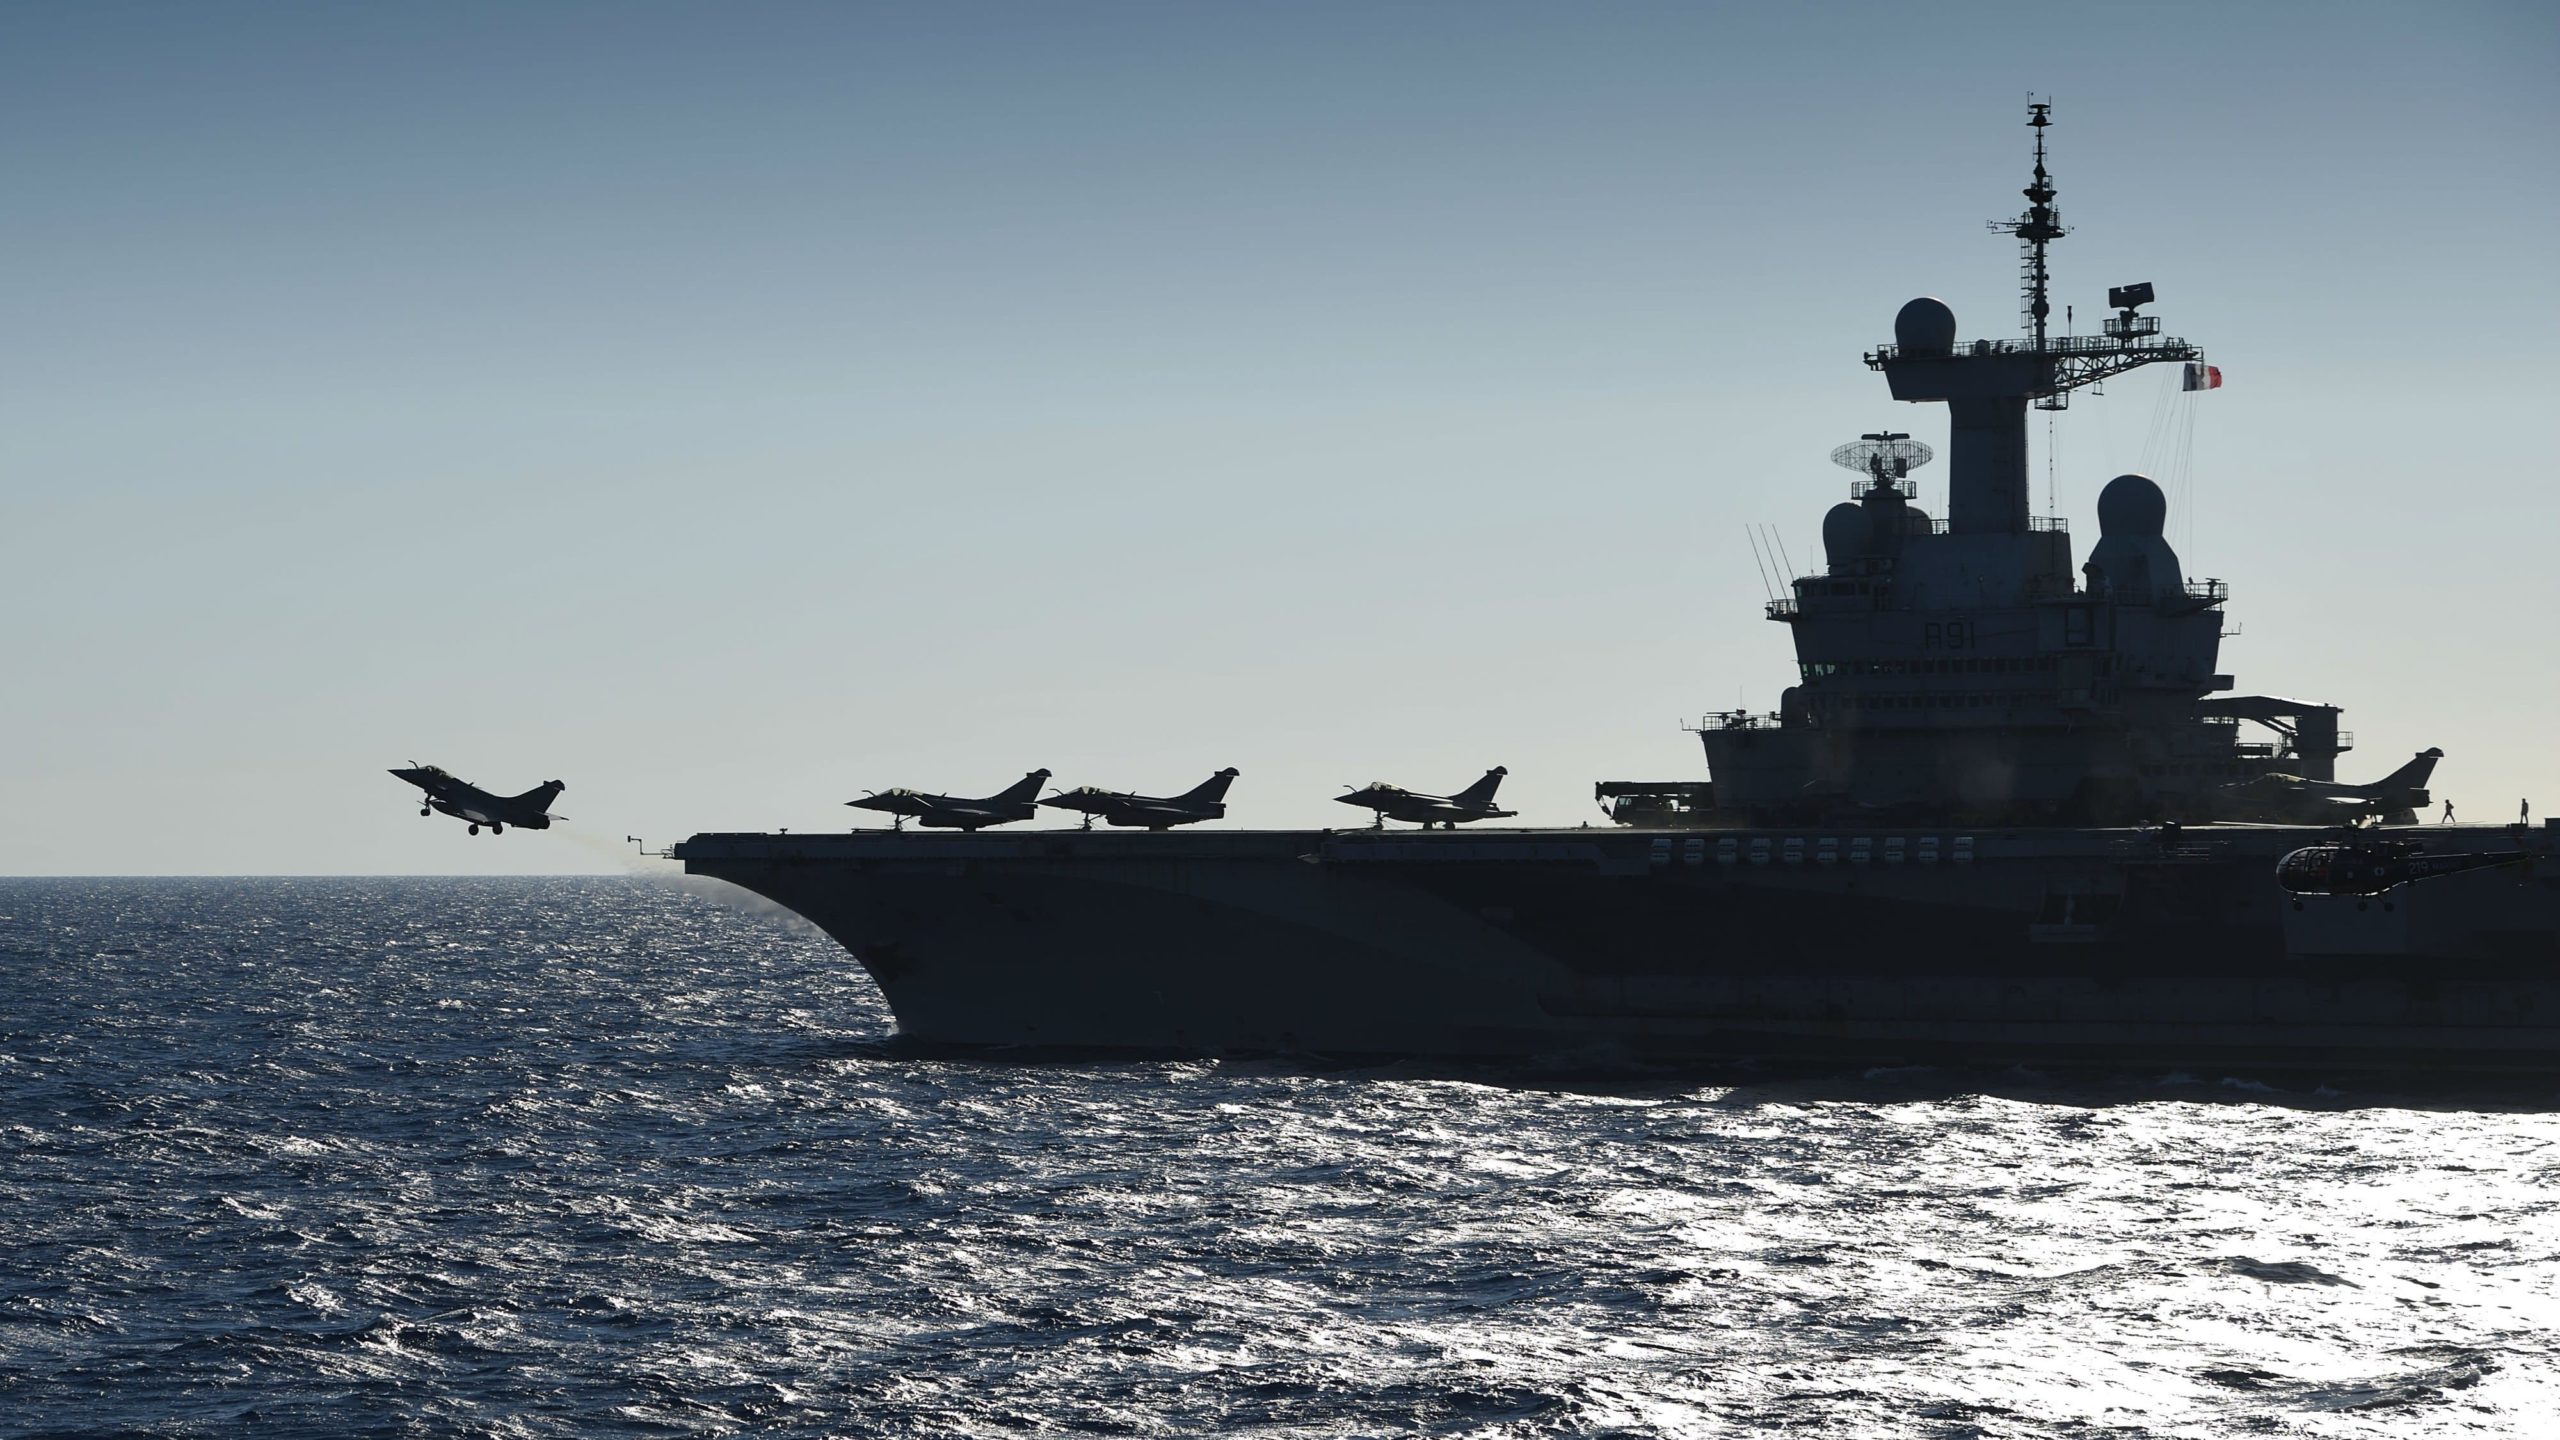 A rafale fighter jet takes off from the French aircraft carrier Charles de Gaulle sailing in the Mediterranean sea on September 29, 2016 in the Mediterranean sea as part of the Operation Arromanches III.